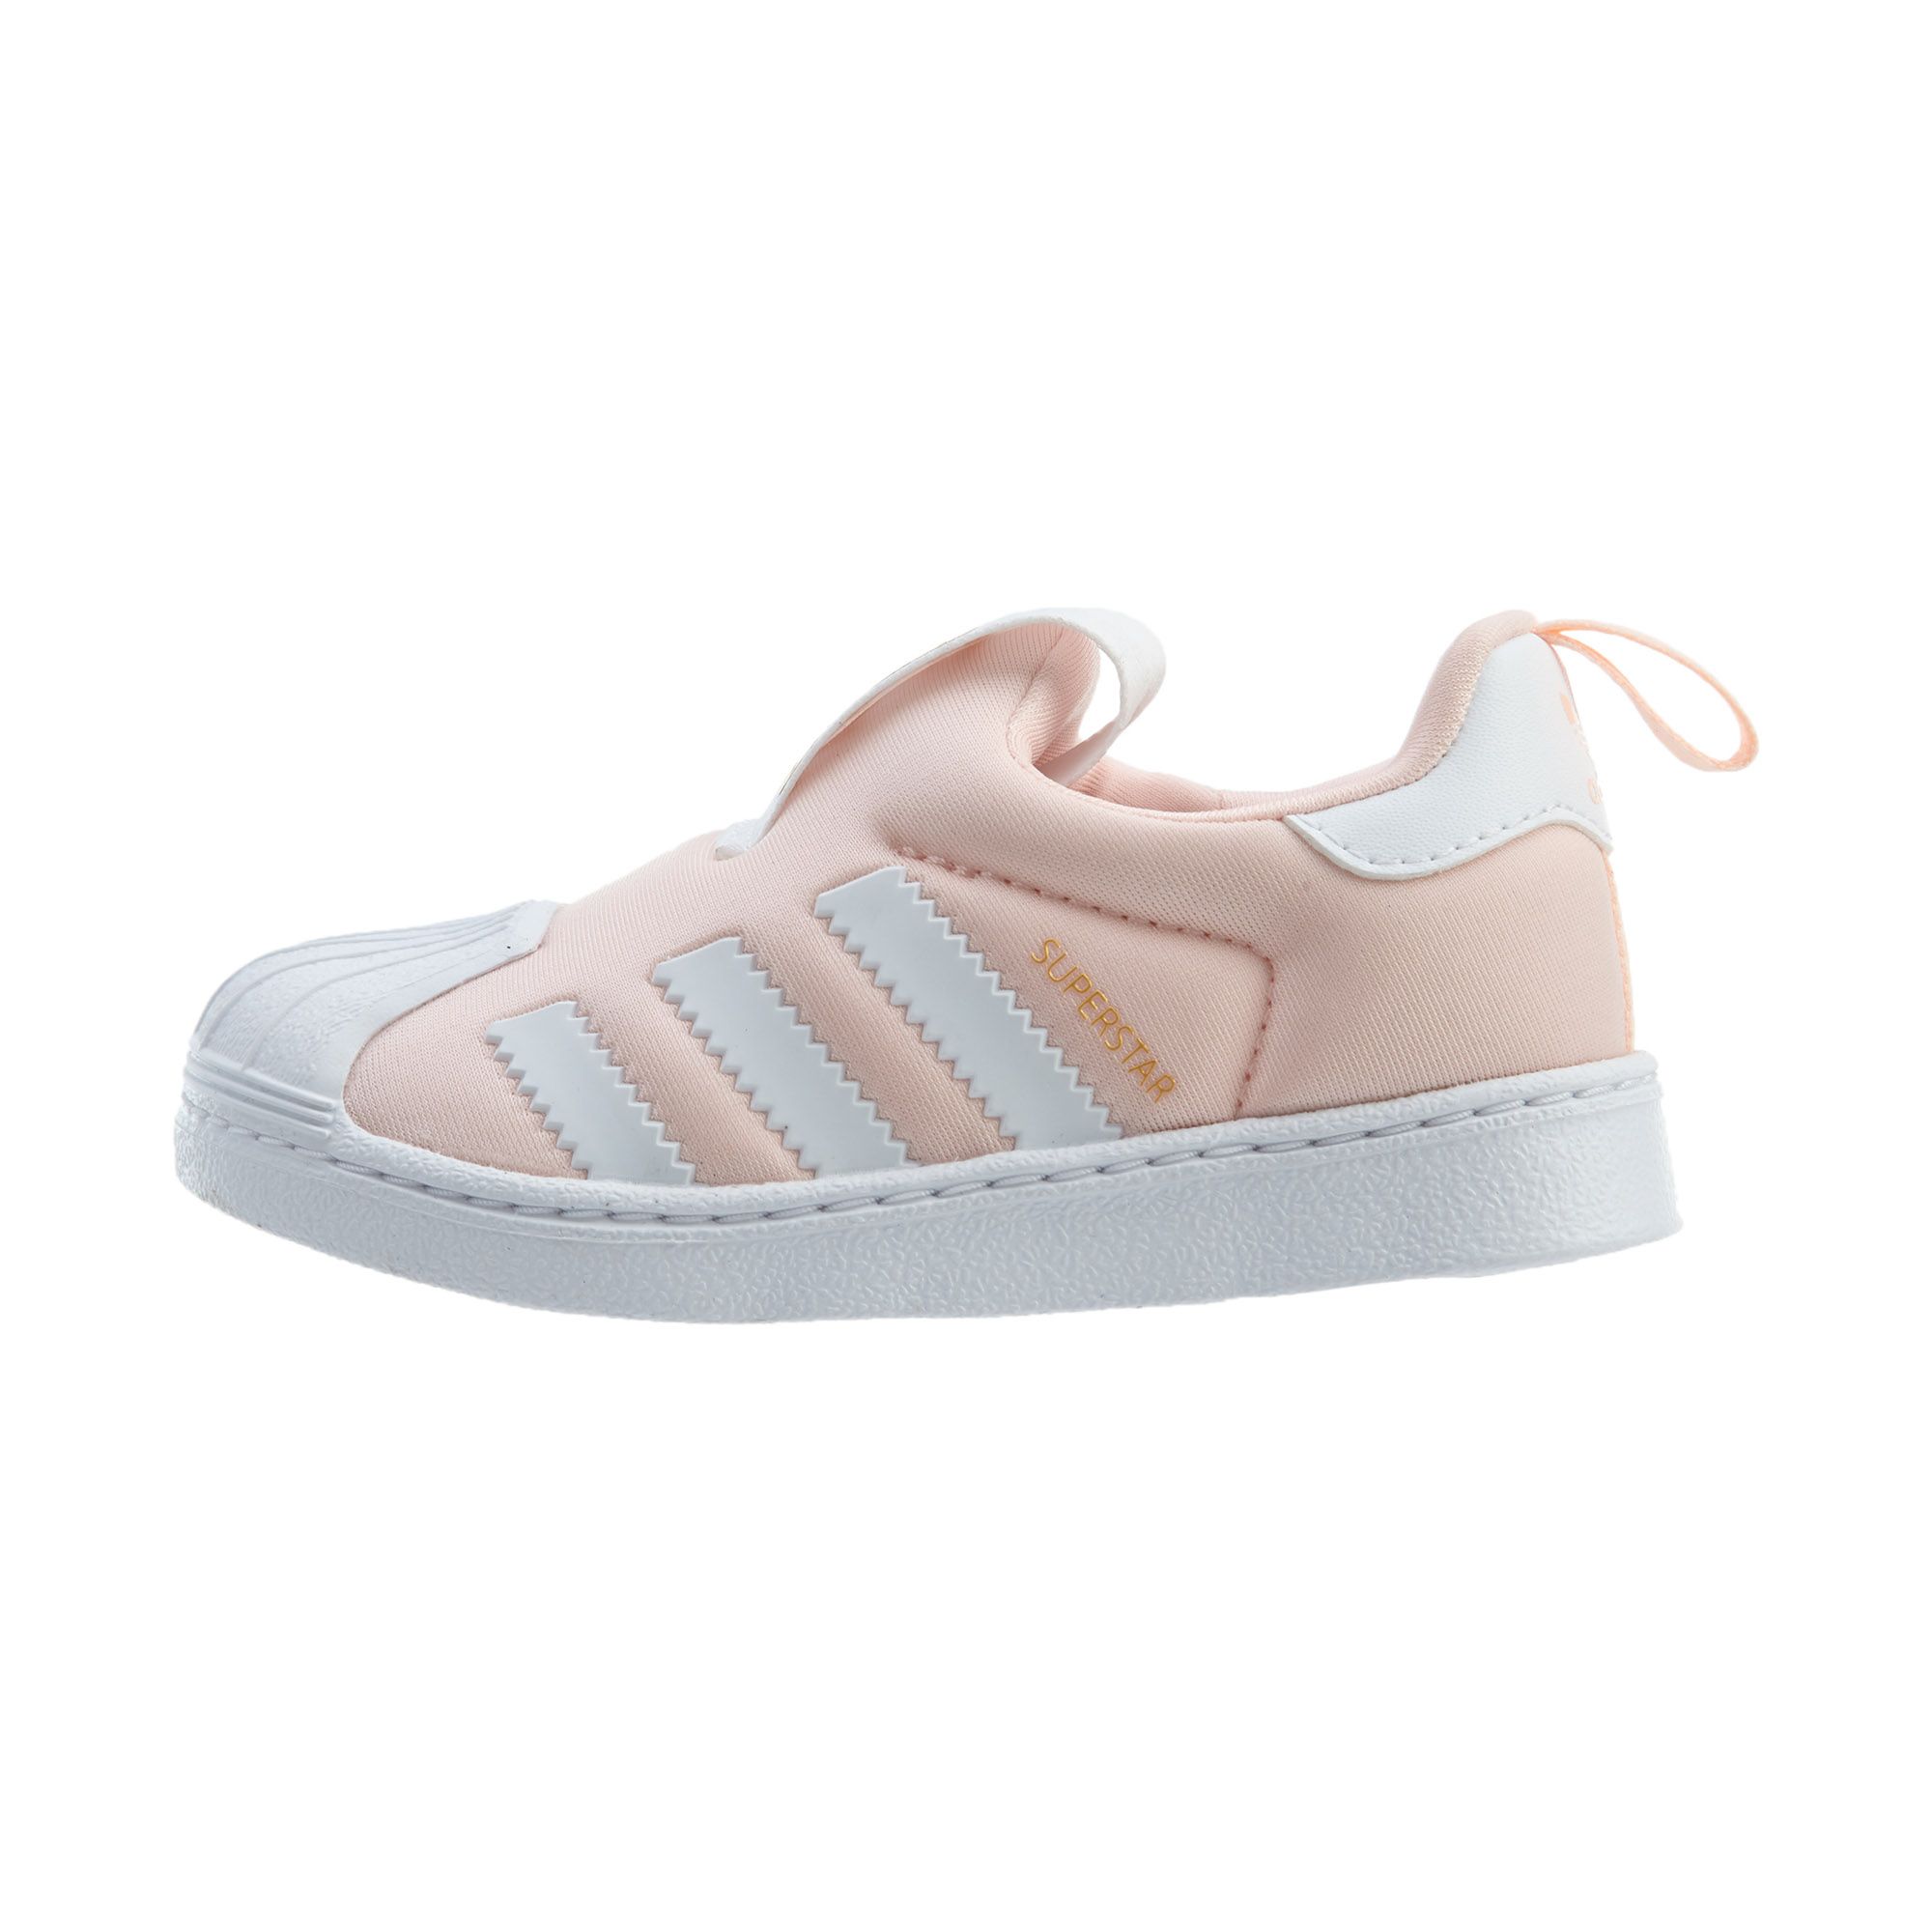 Adidas Superstar 360 Toddlers Style 